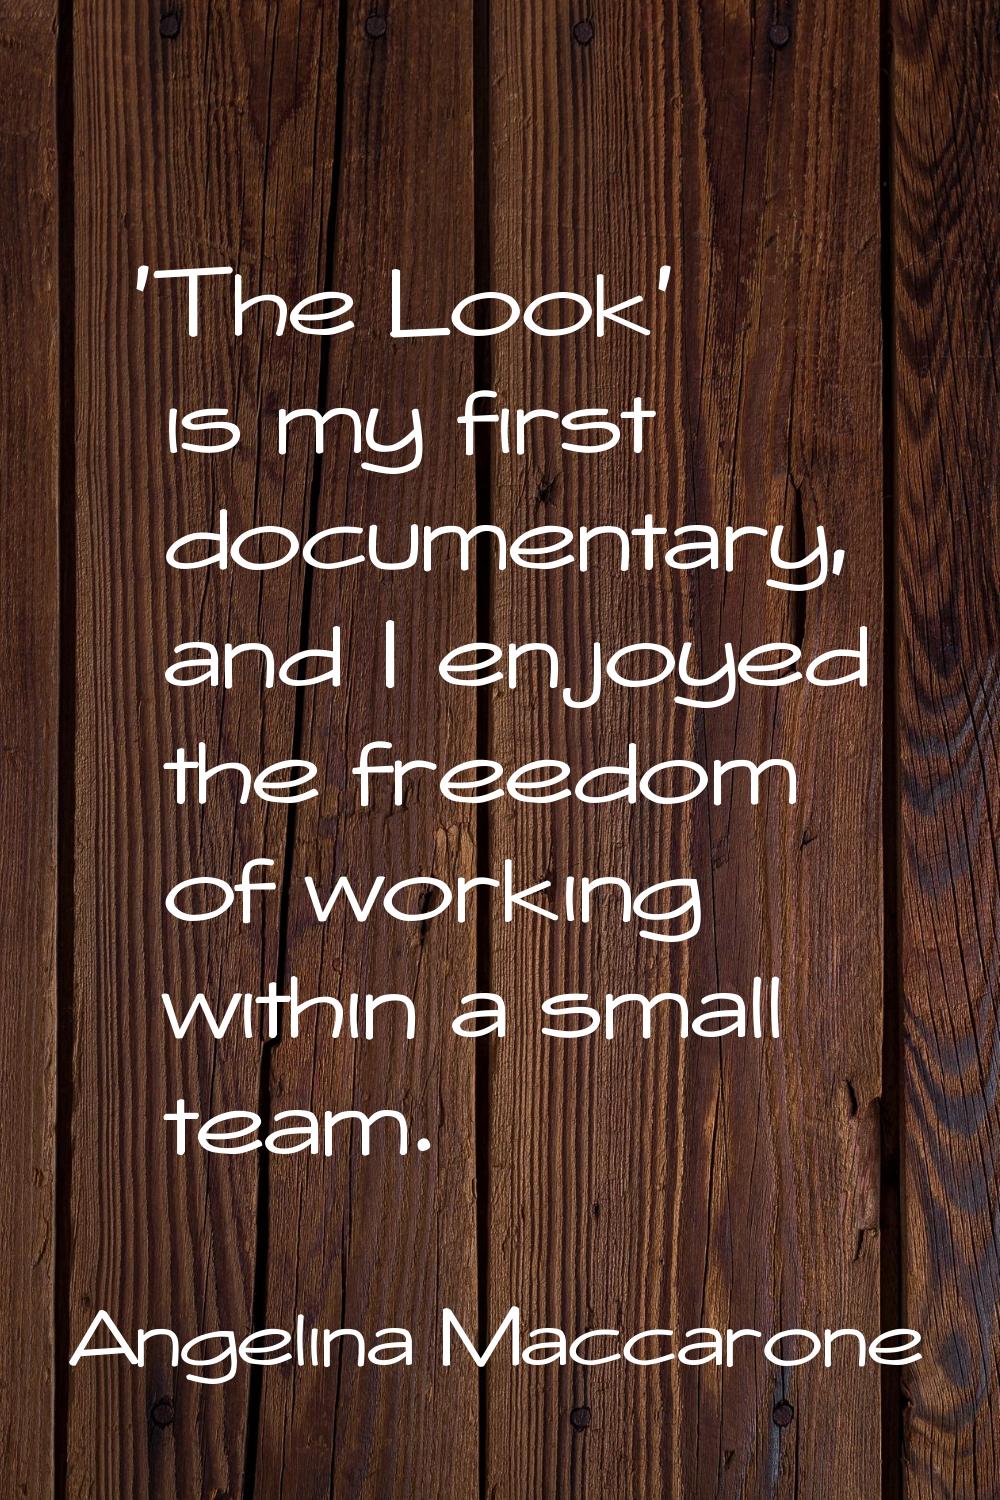 'The Look' is my first documentary, and I enjoyed the freedom of working within a small team.